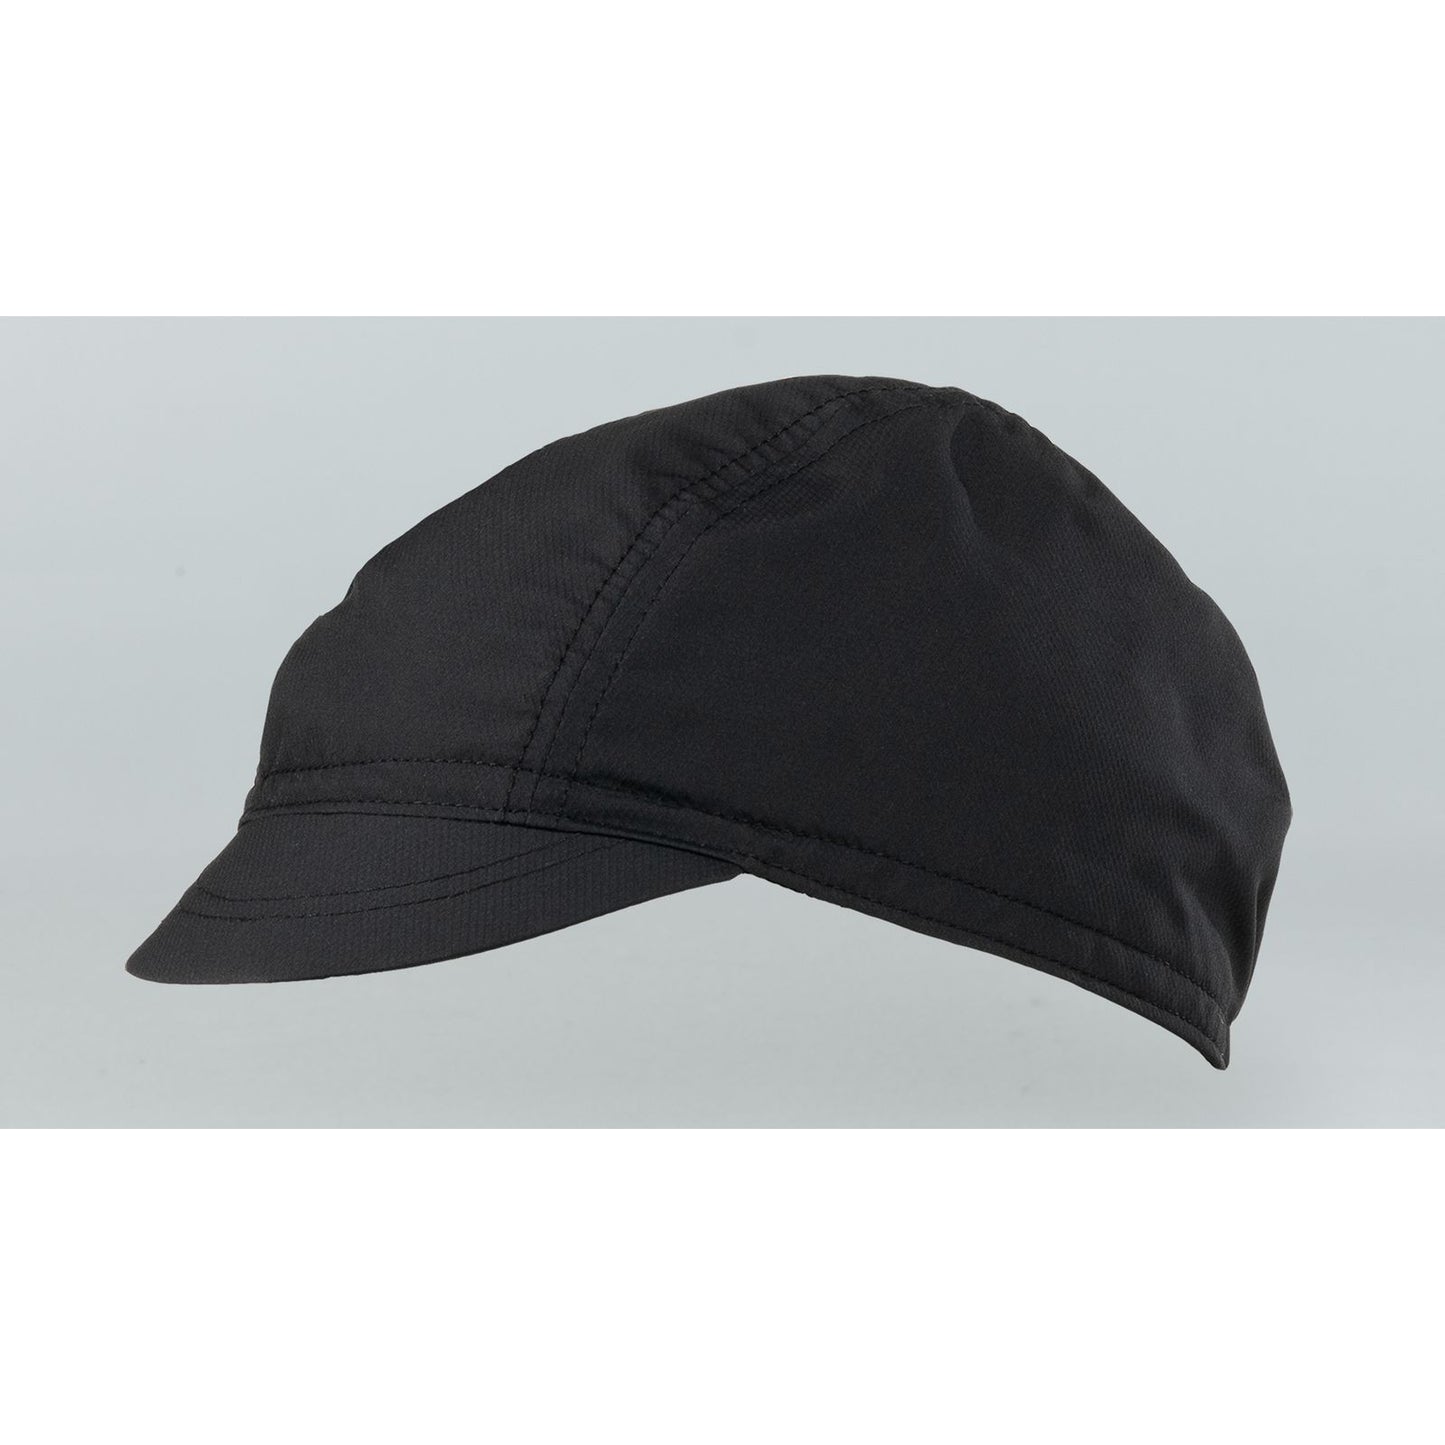 Specialized Deflect™ UV Cycling Cap - Headwear - Bicycle Warehouse